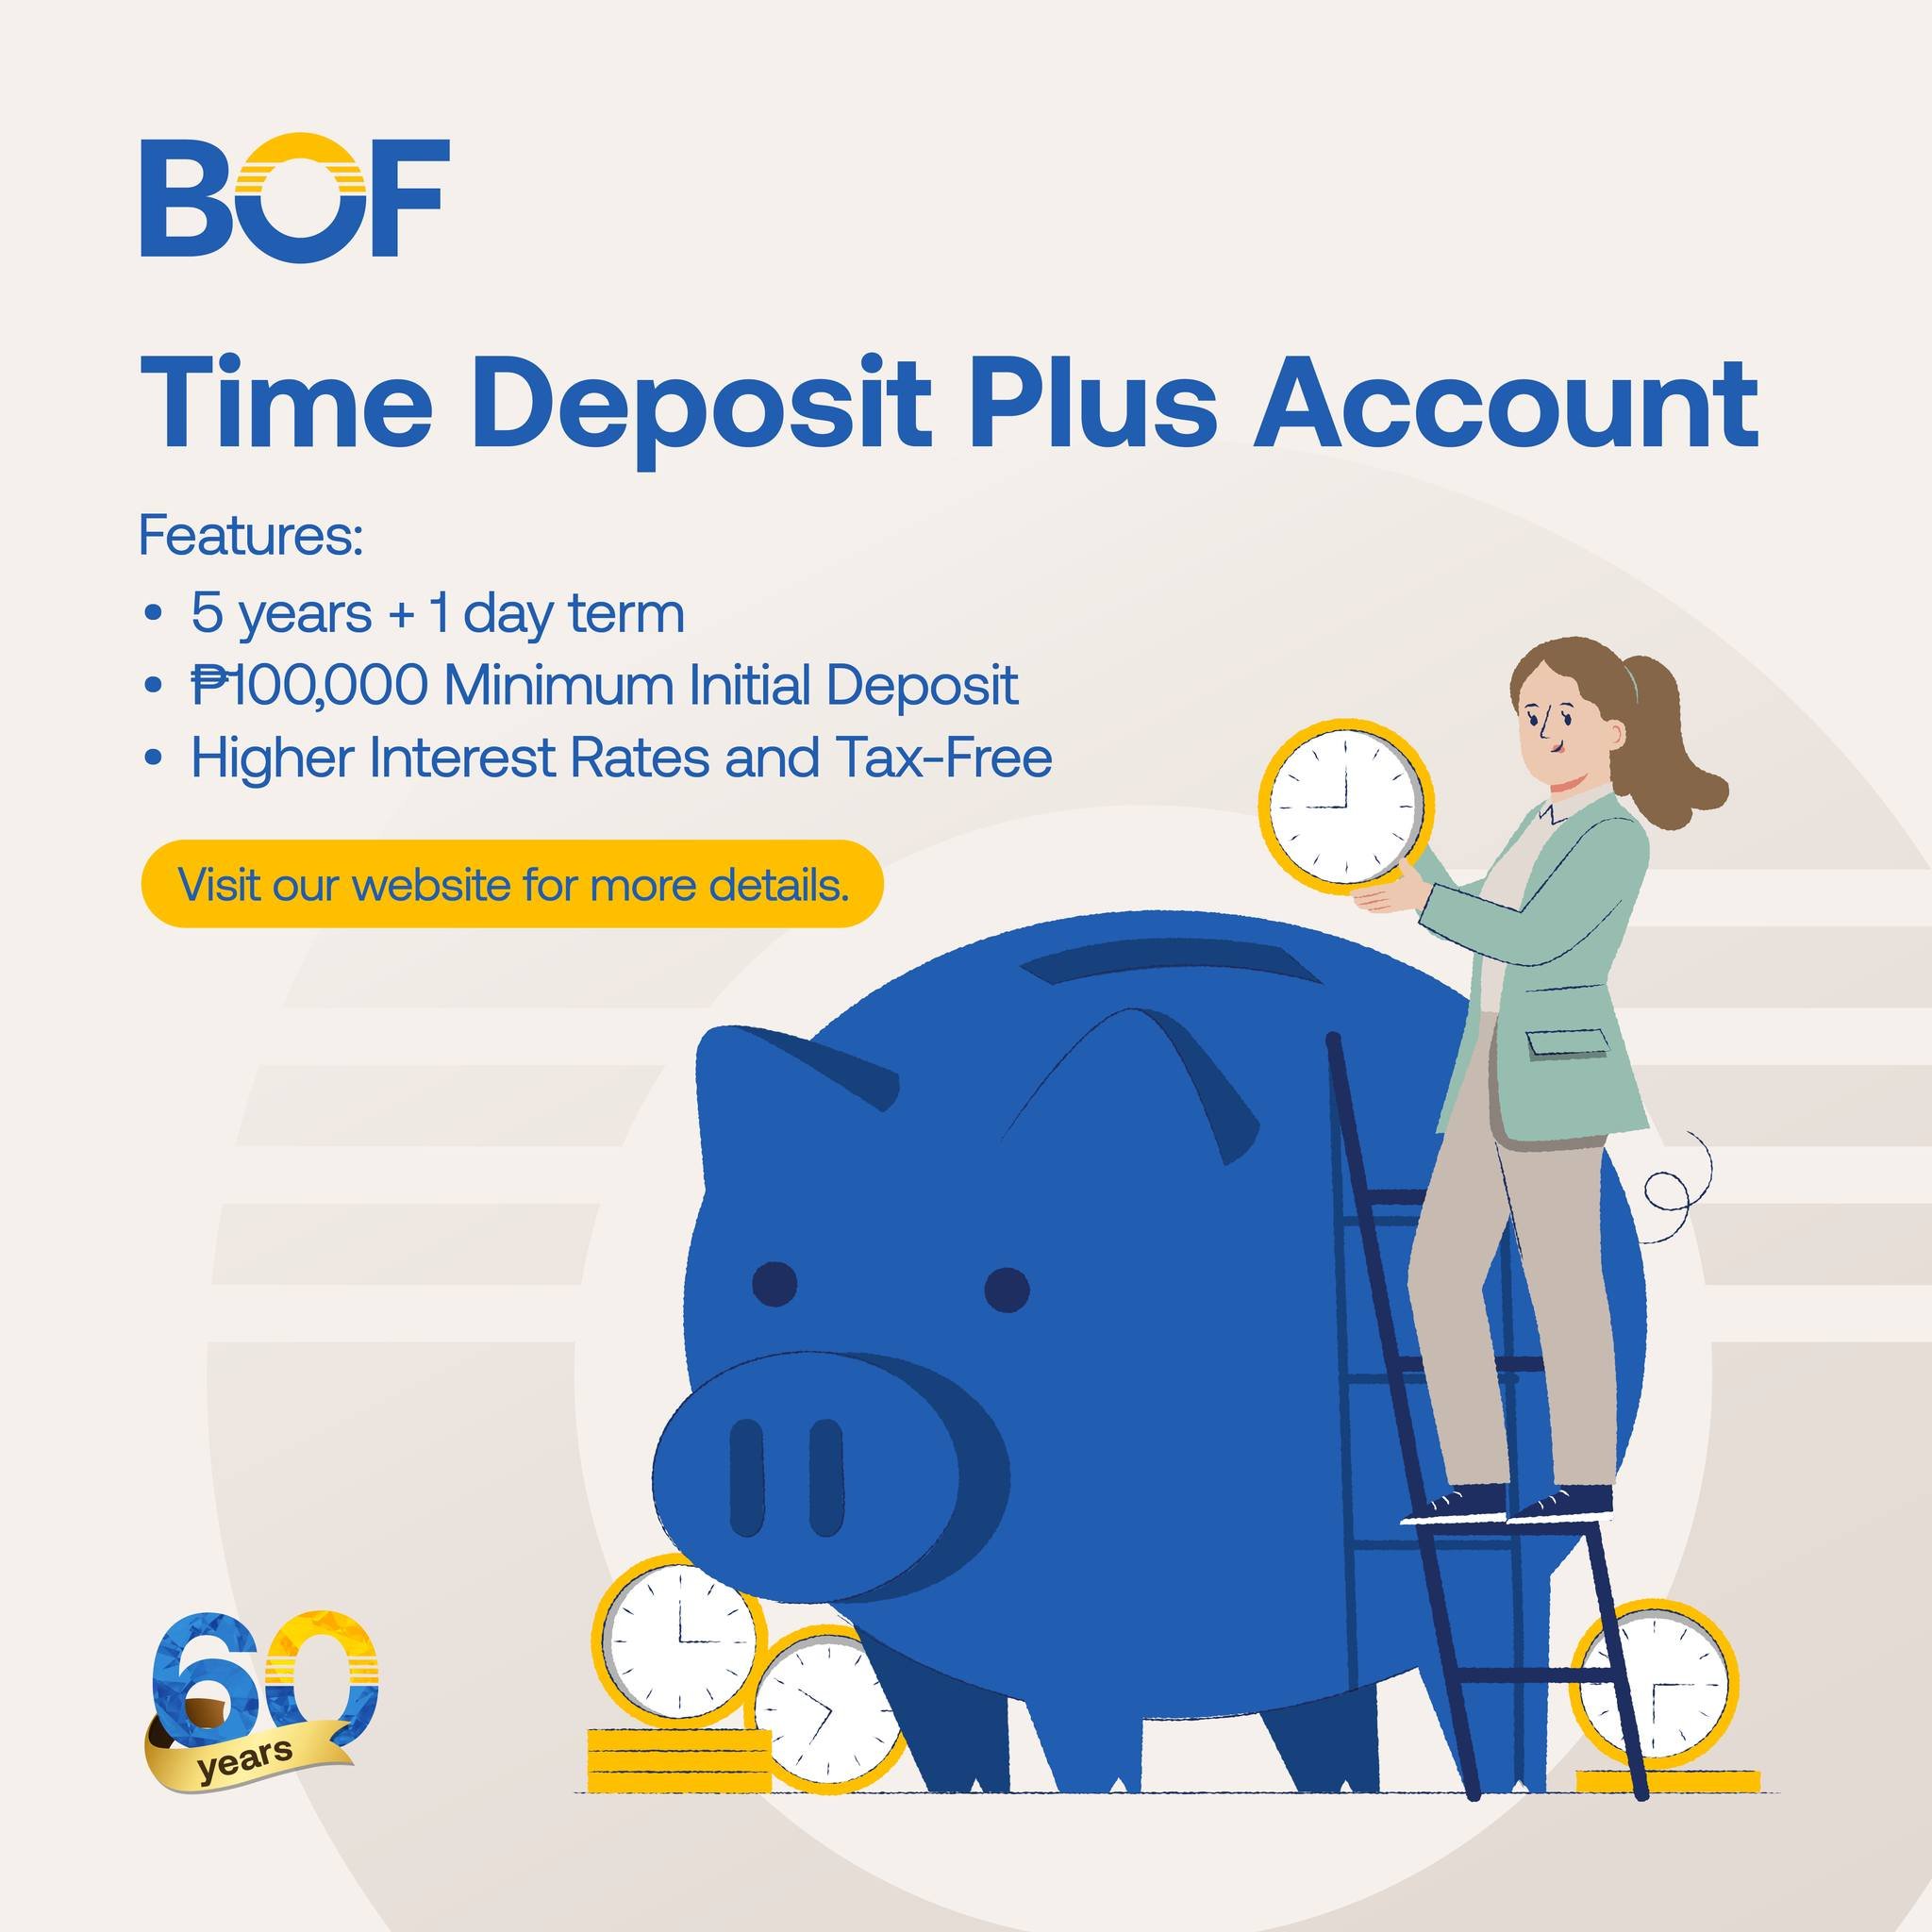 Introducing BOF's latest deposit offering: Time Deposit Account Plus!

Unlock the power of long-term savings with our Time Deposit Plus Account!
Enjoy tax-free benefits, higher interest rates, and a secure 5-year + 1 day term with just a 
minimum ini